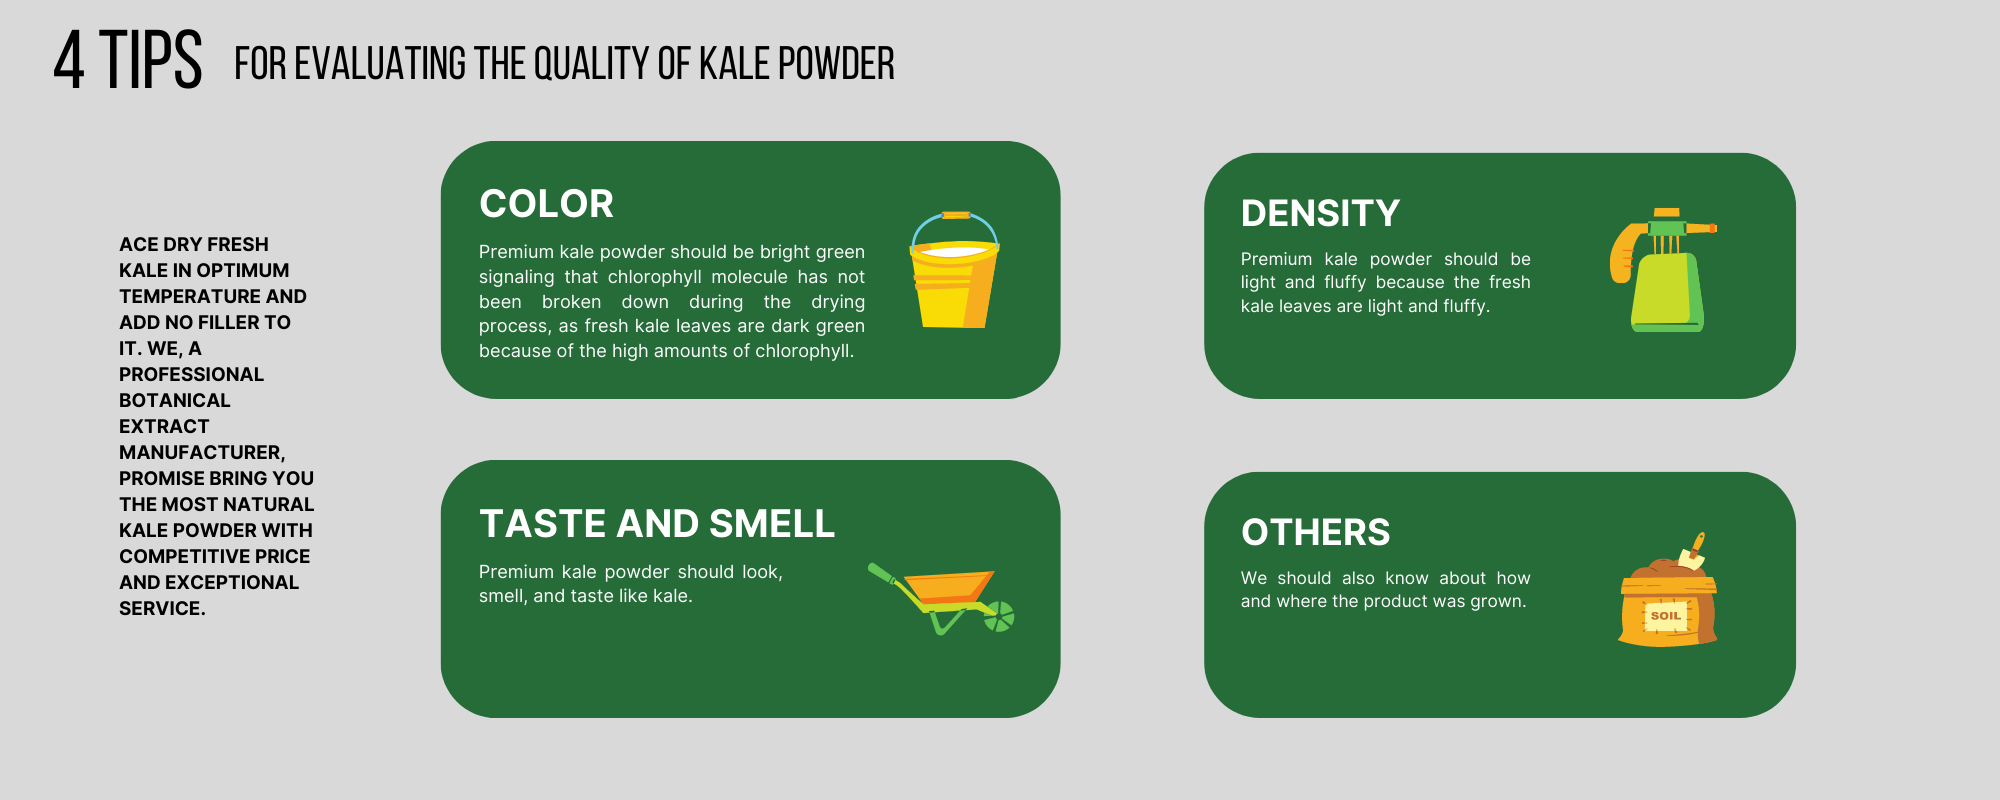 4_Tips_For_Evaluating_The_Quality_Of_Kale_Powder-1.png